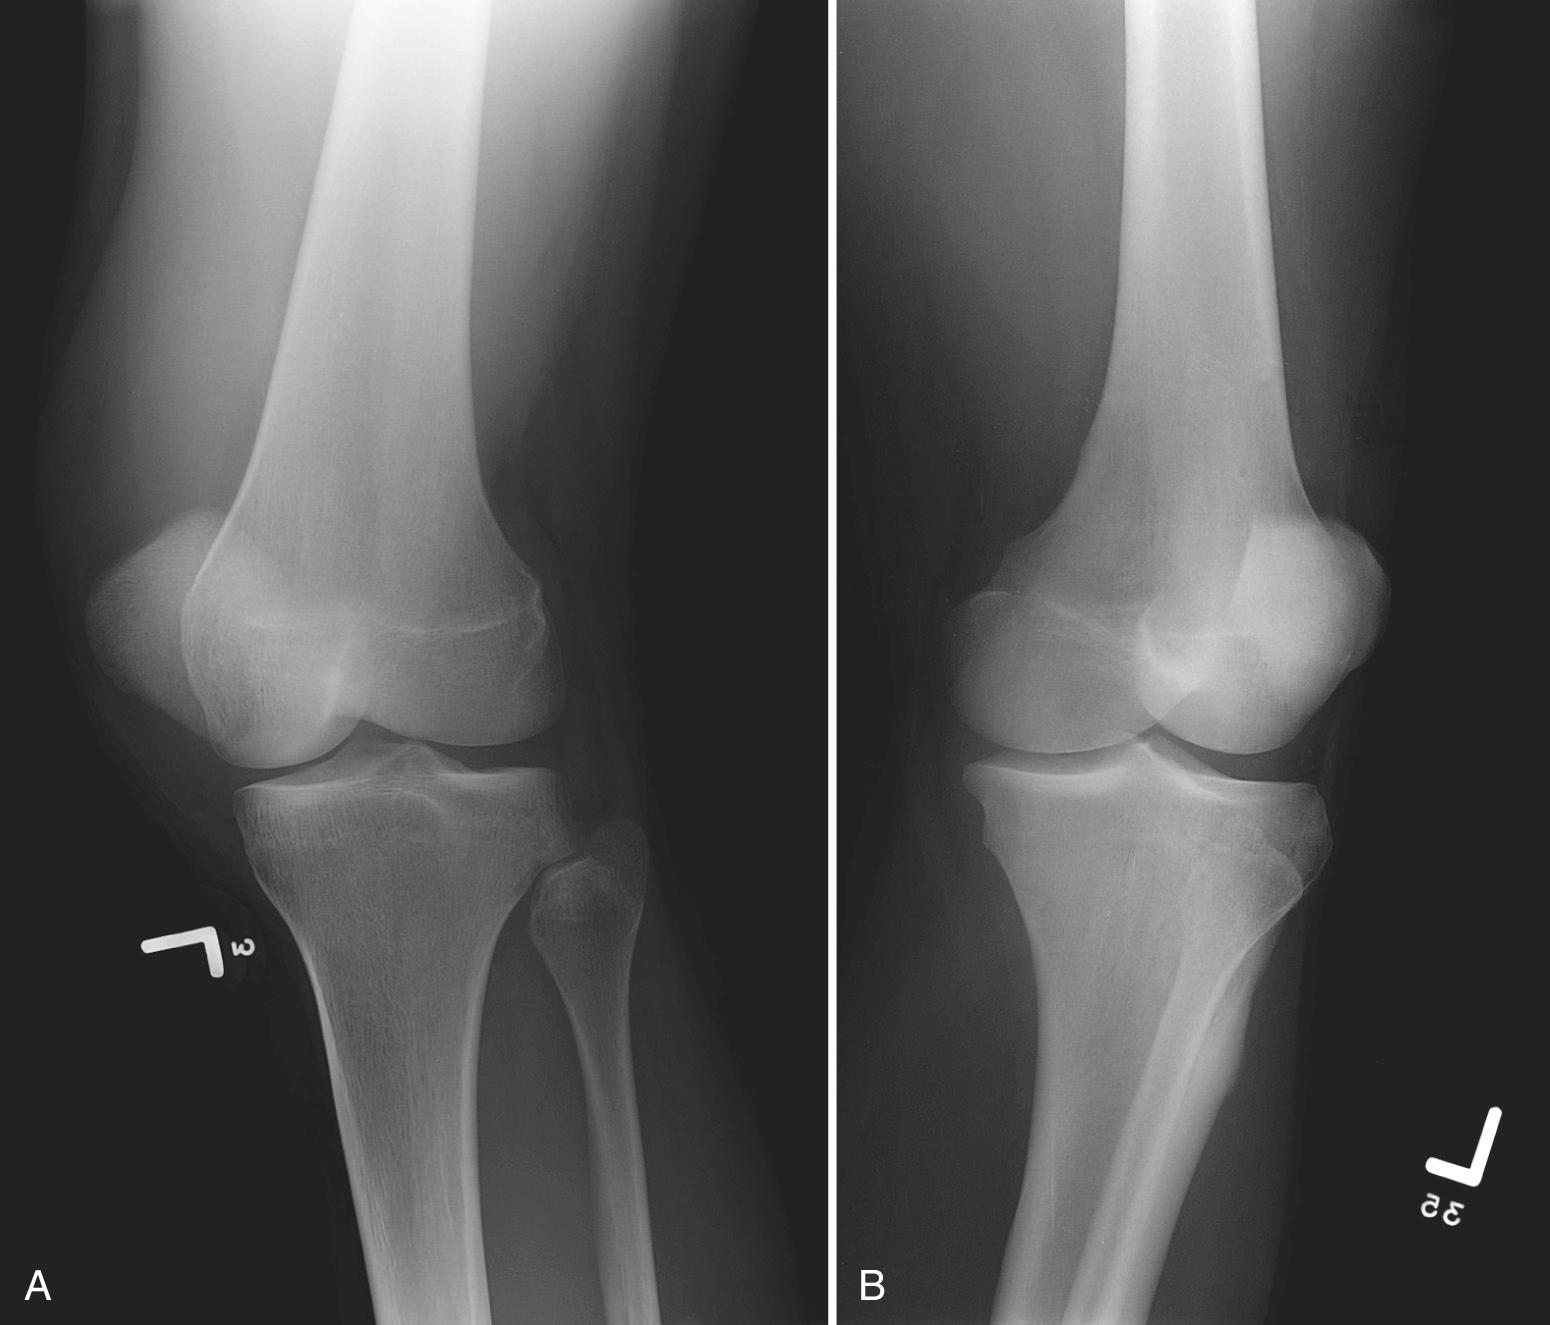 FIG 5.7, Internal (A) and external (B) rotational views of the knee in different patients. In external rotation the tibia and fibula are superimposed on each other; with internal rotation there should be less superimposition. A suprapatellar joint effusion is seen on the internally rotated view.